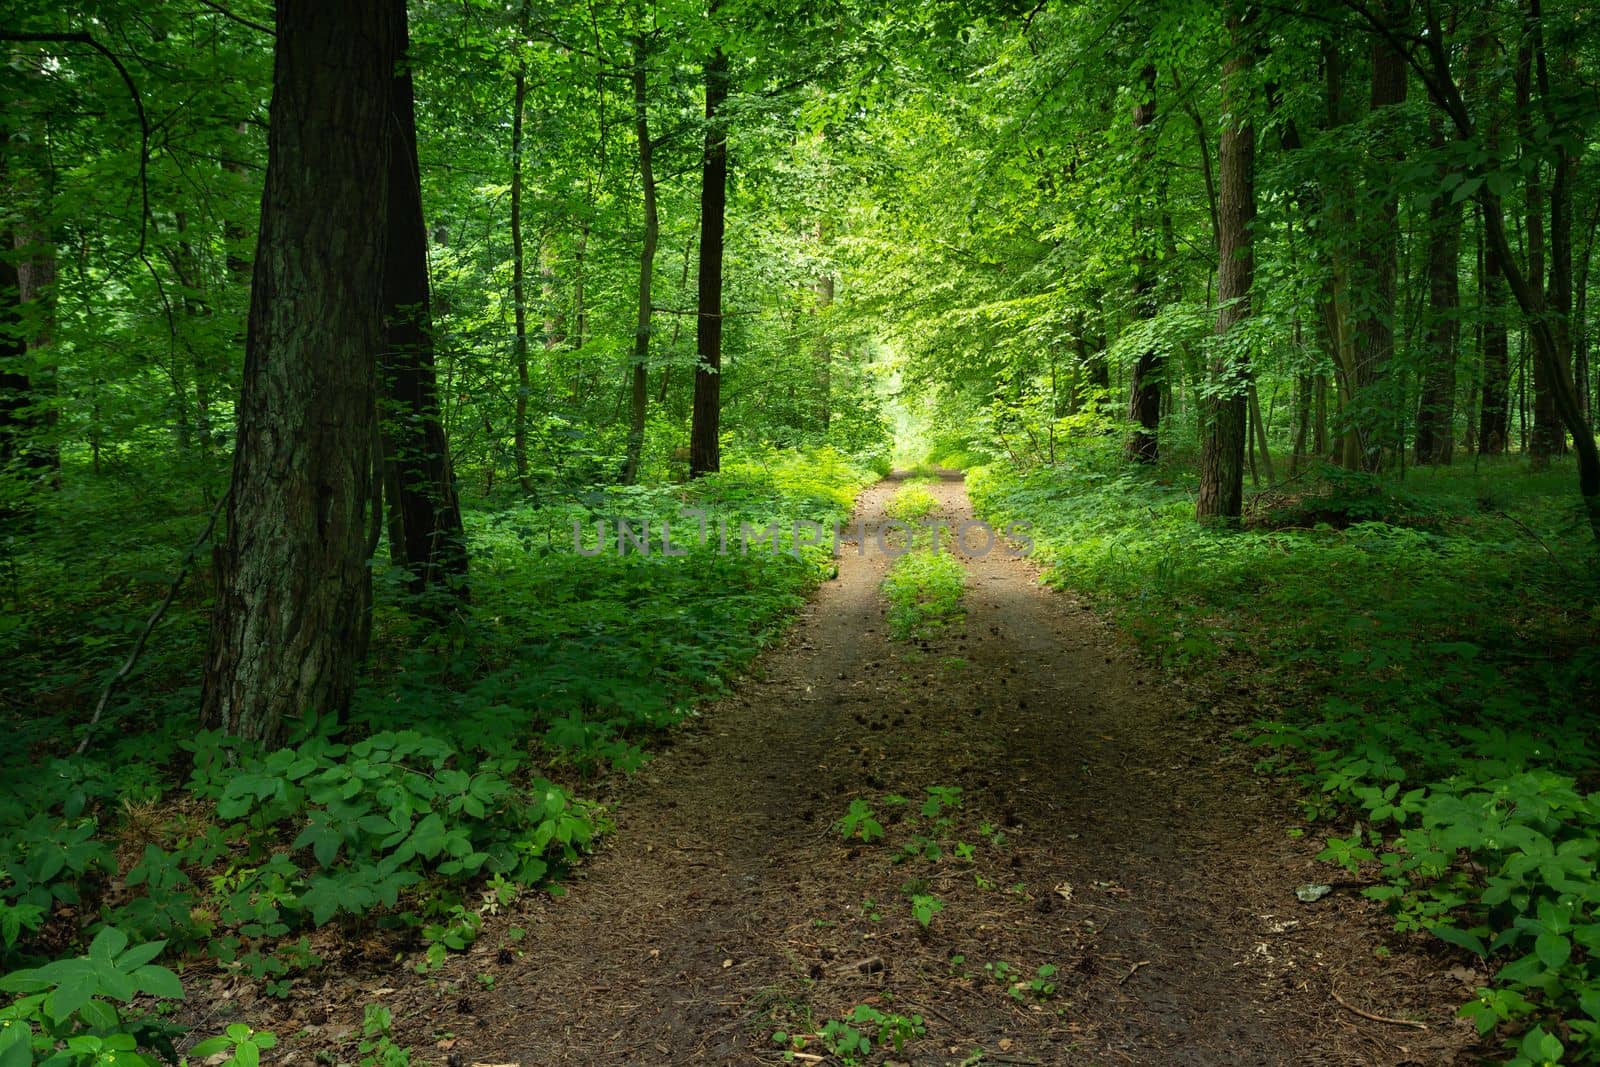 A dirt road through a dense and green forest in eastern Poland